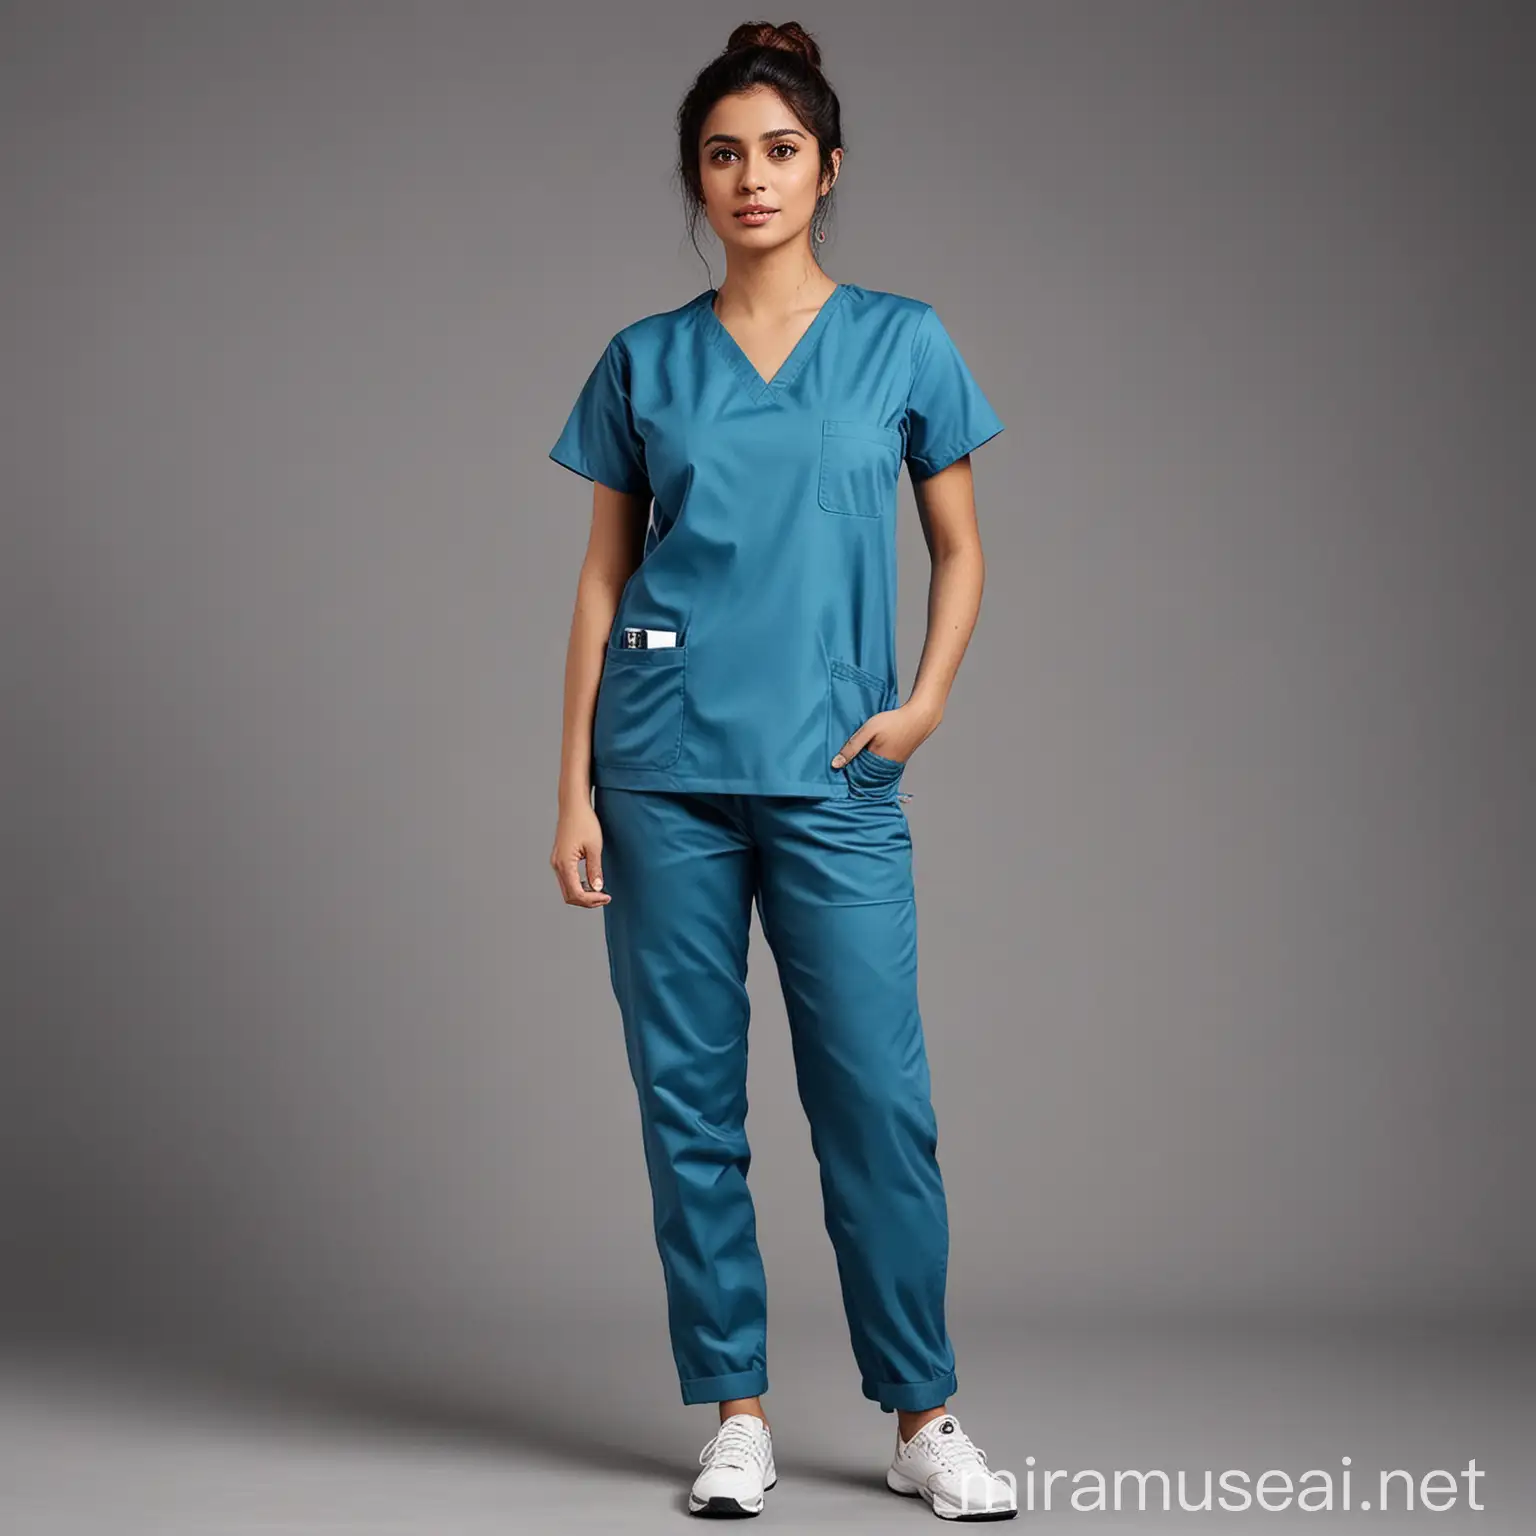 Stylish Indian Model Showcasing Doctor Scrub Suit Trendy Apparel for Medical Professionals